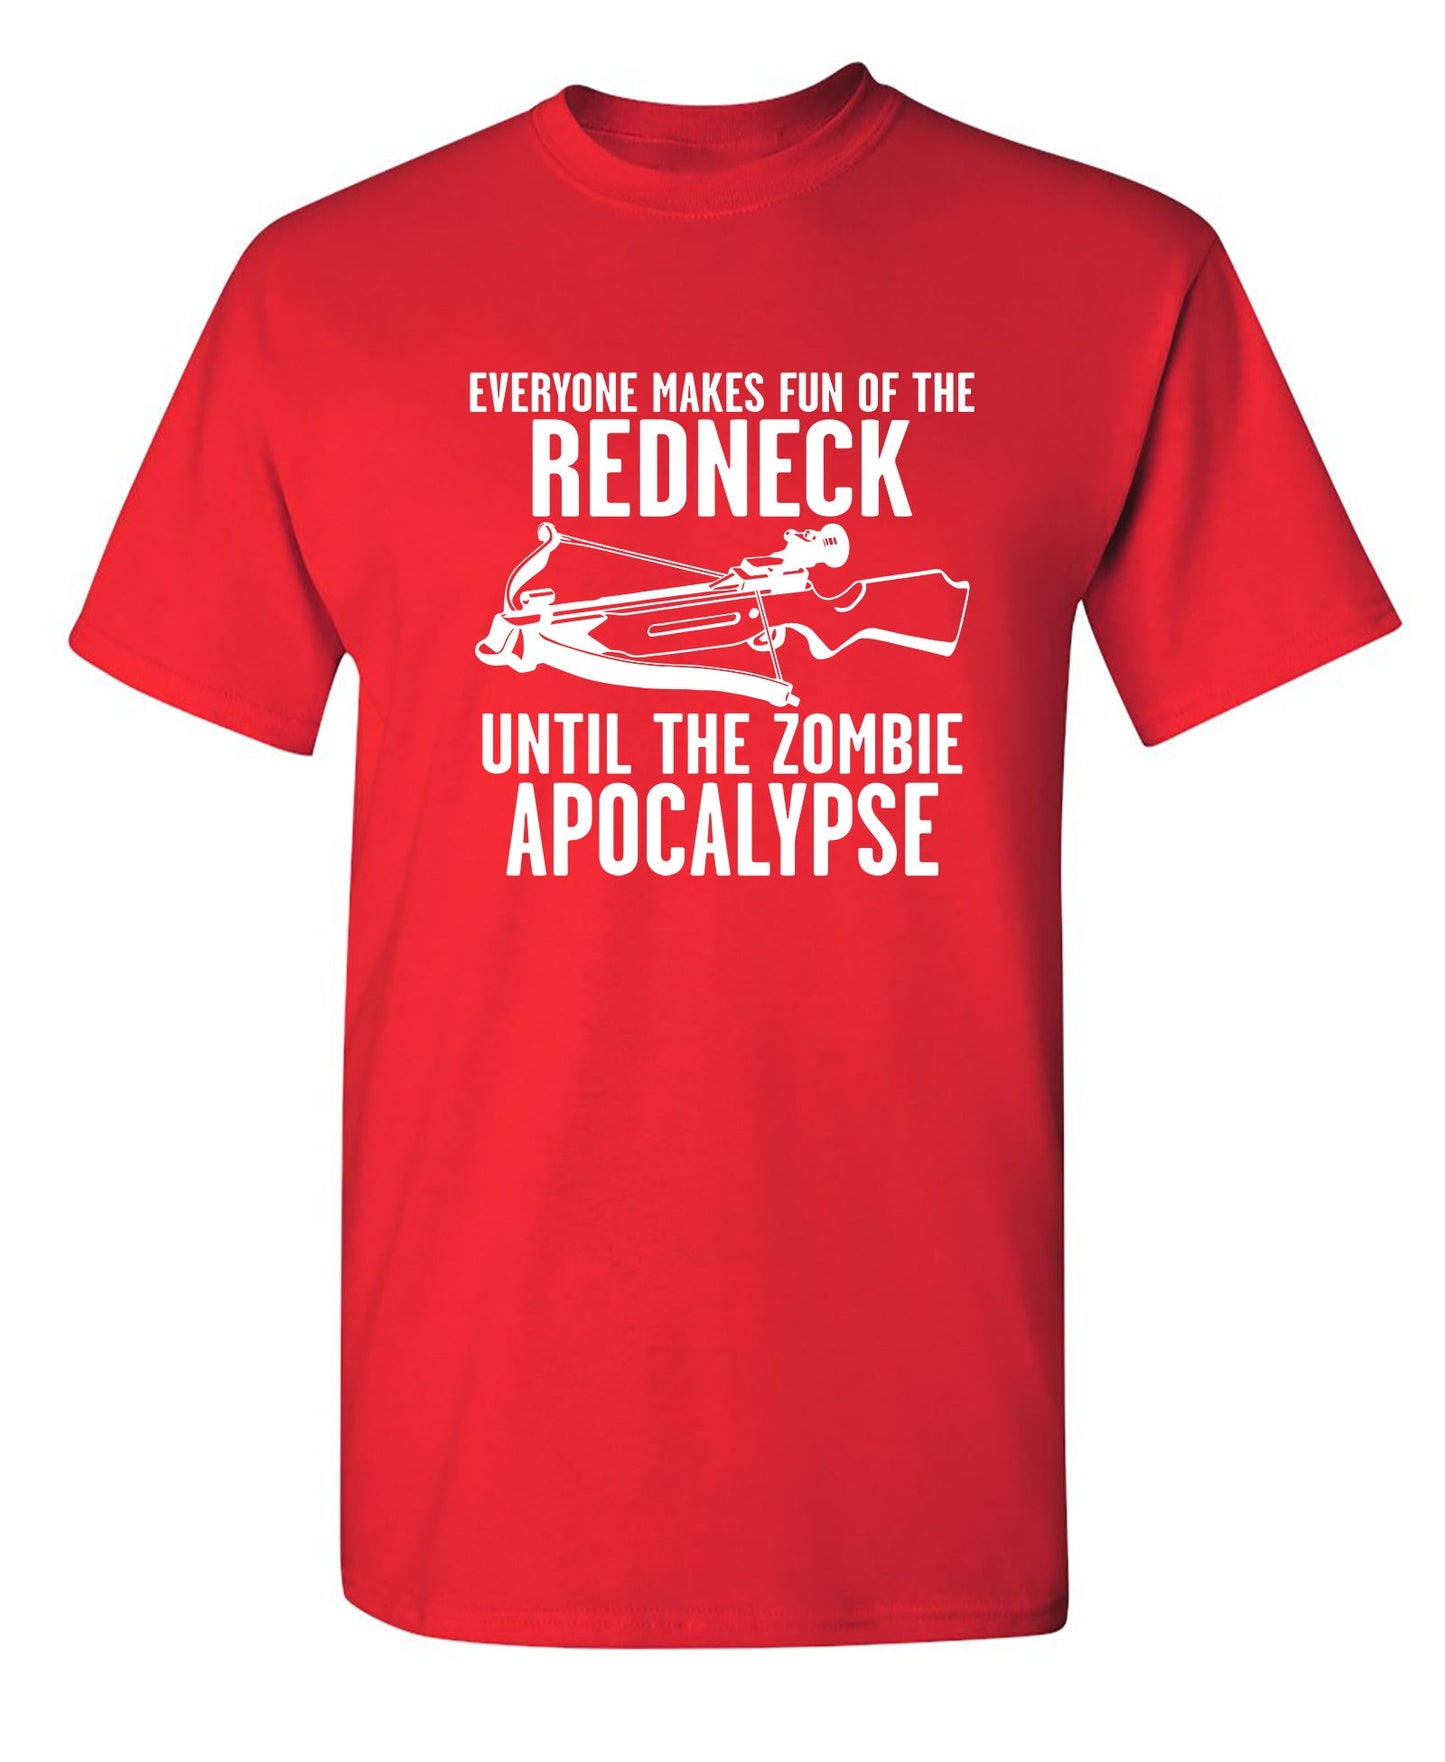 Everyone Makes Fun of the Redneck Until The Zombie Apocalypse - Funny T Shirts & Graphic Tees